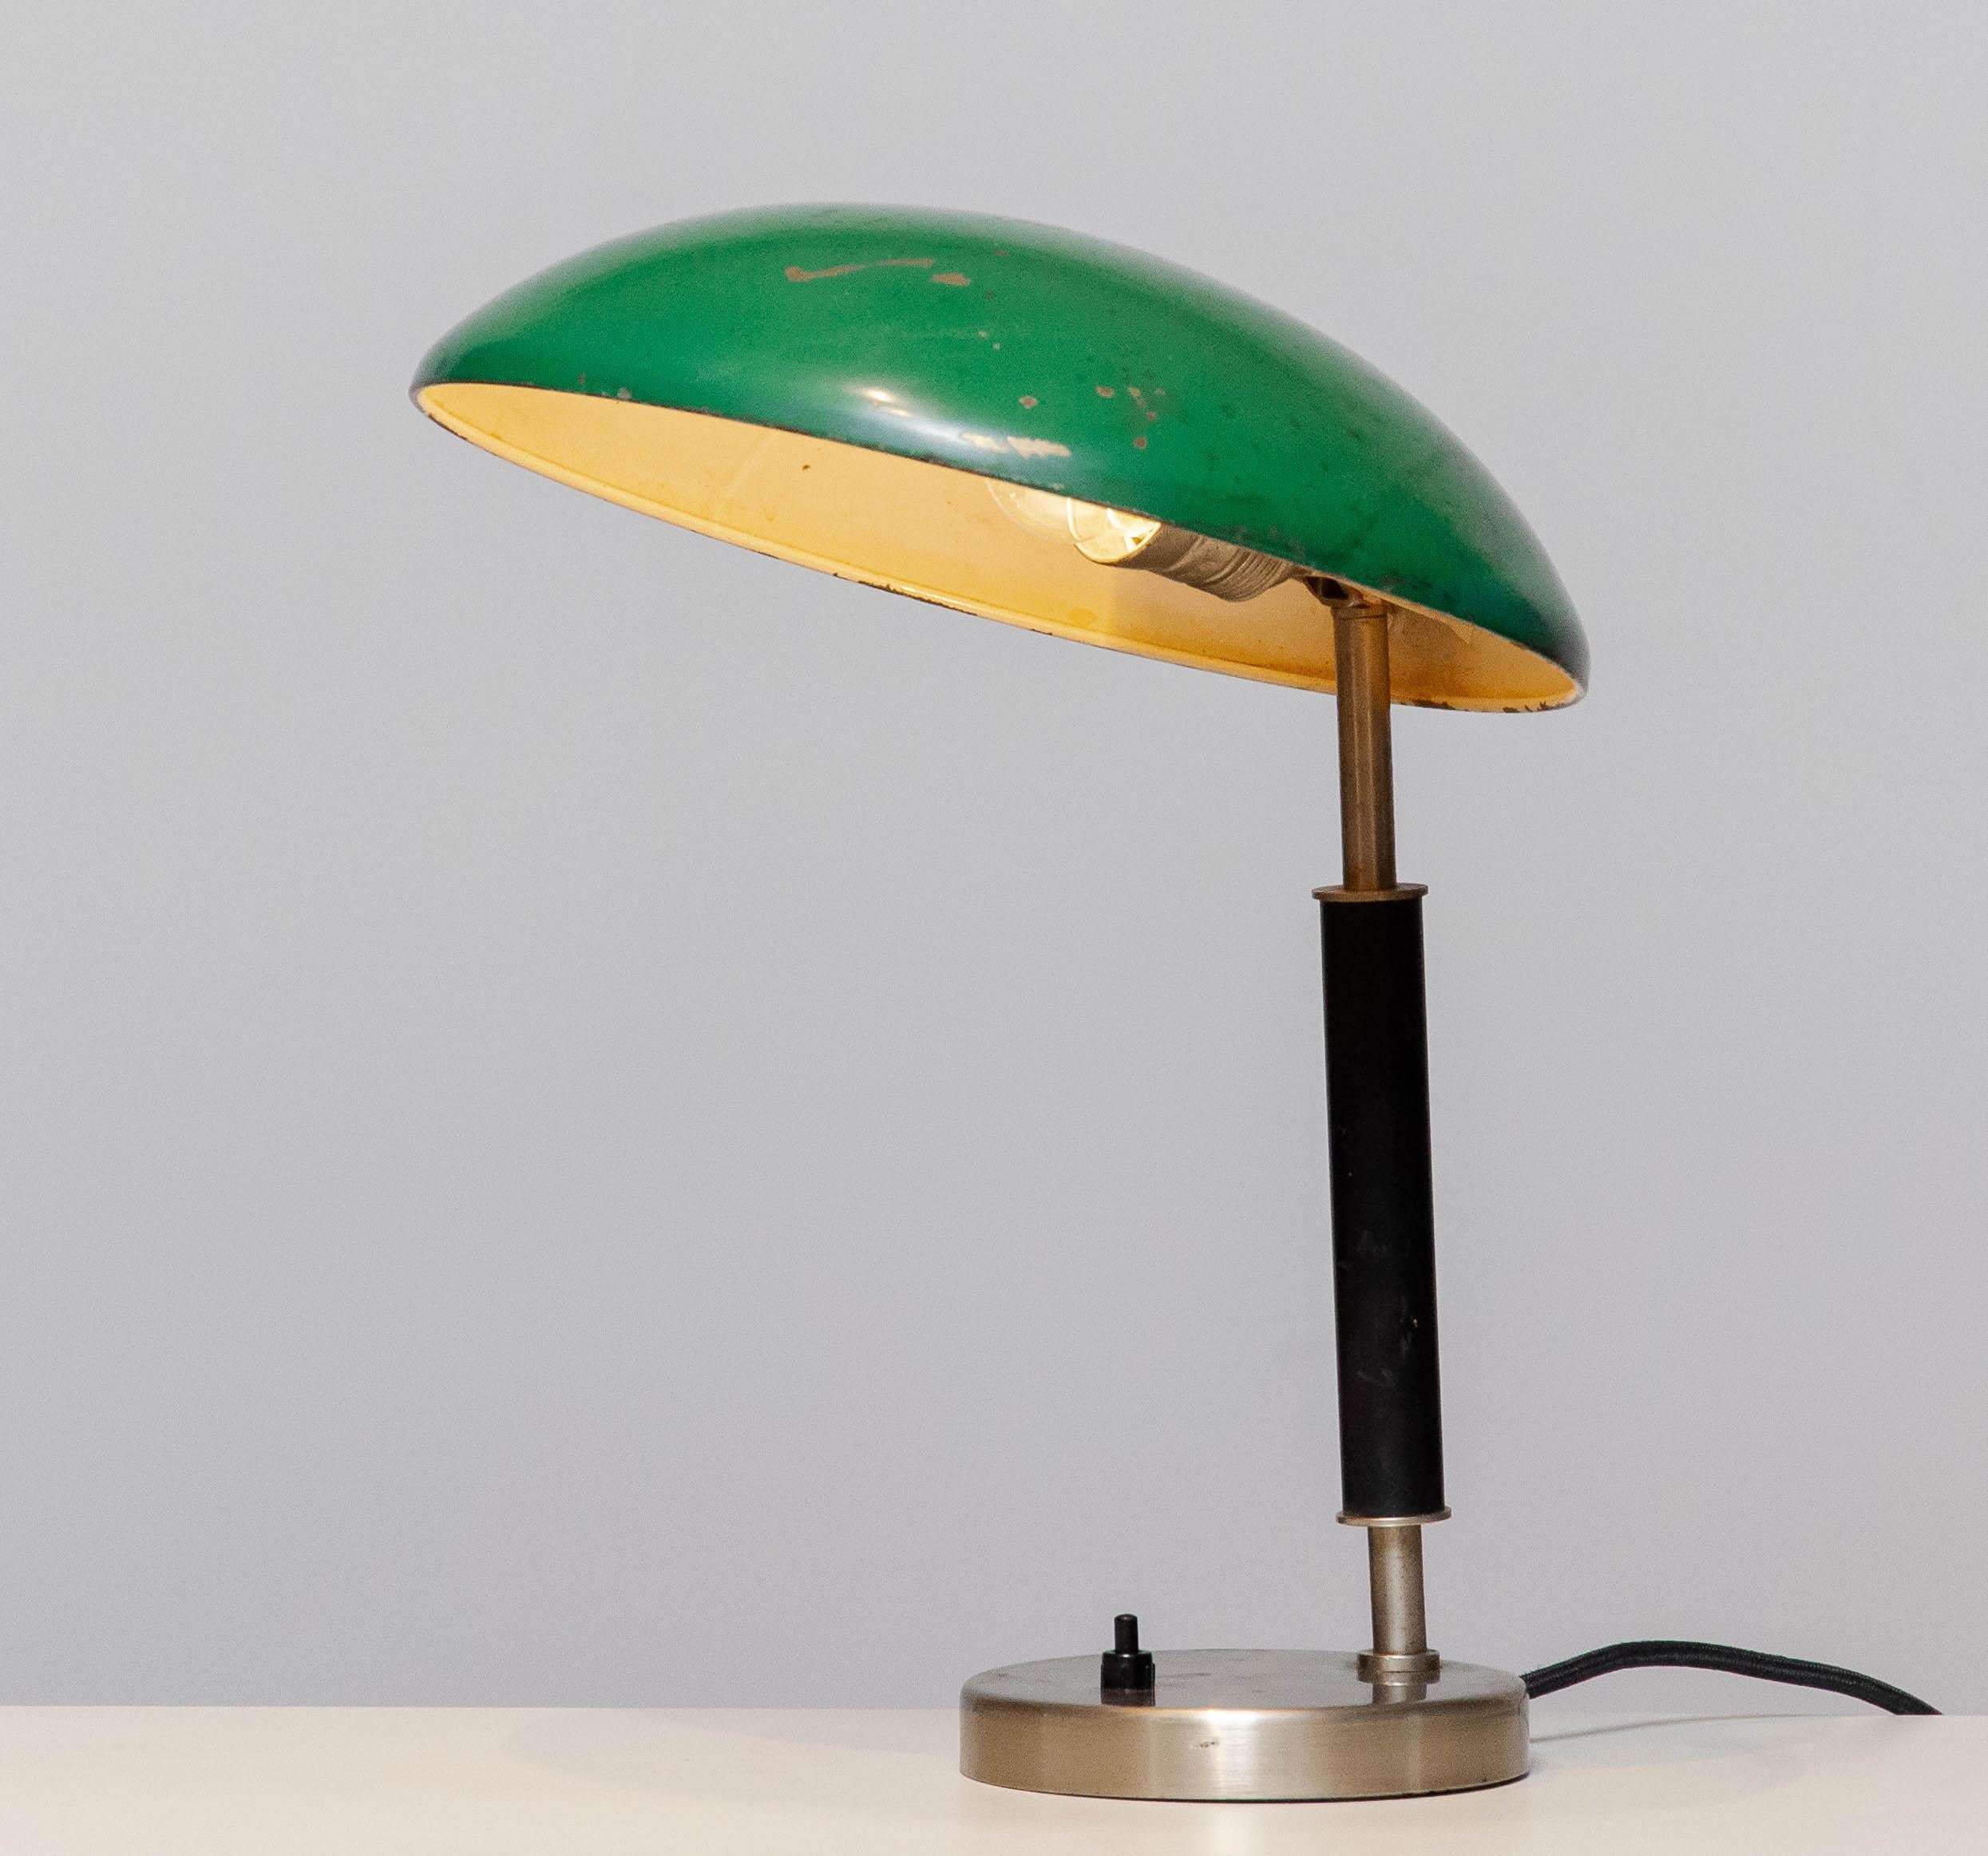 Beautiful industrial table lamp / desk lamp from the 1930's designed by Harald Notini for Arvid Böhlmarks Lampfabrik AB Stockholm Sweden.
The green lacquered shade is made of Brass and the clear metal cover on the base hides a cast iron stand.
The